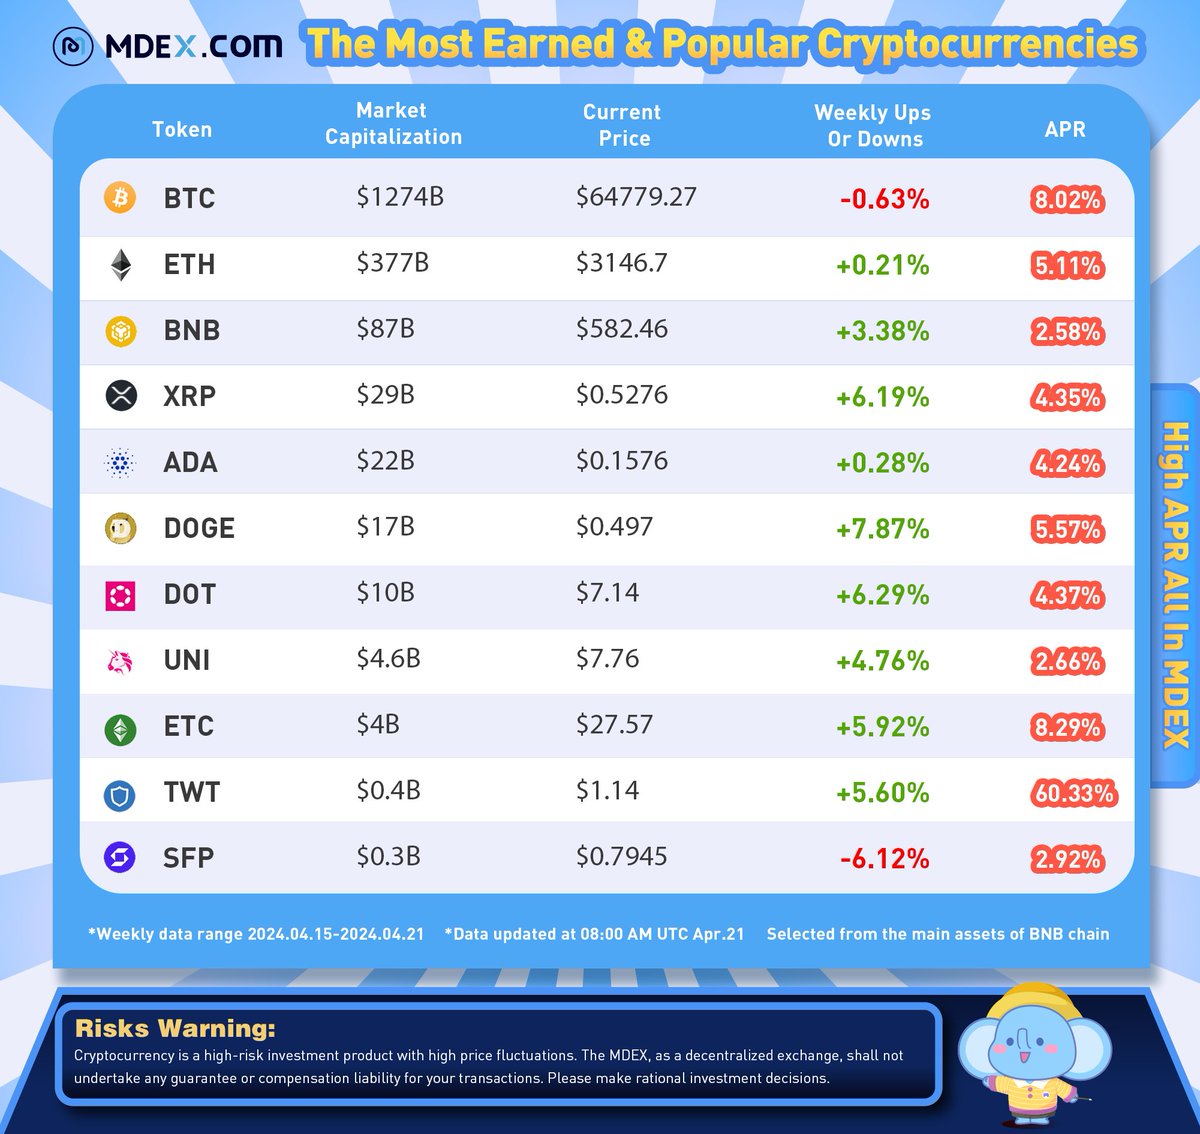 📈Check out the 'Most Earned & Popular Major #Cryptocurrencies Ranking' with the highest #APR on MDEX.com on #BNBChain from Apr 15-Apr 21. 💜Stay tuned to @Mdextech for more updates on HIGH APR #Cryptocurrencies. #BTC #ETH #BNB #XRP $tip #USTC